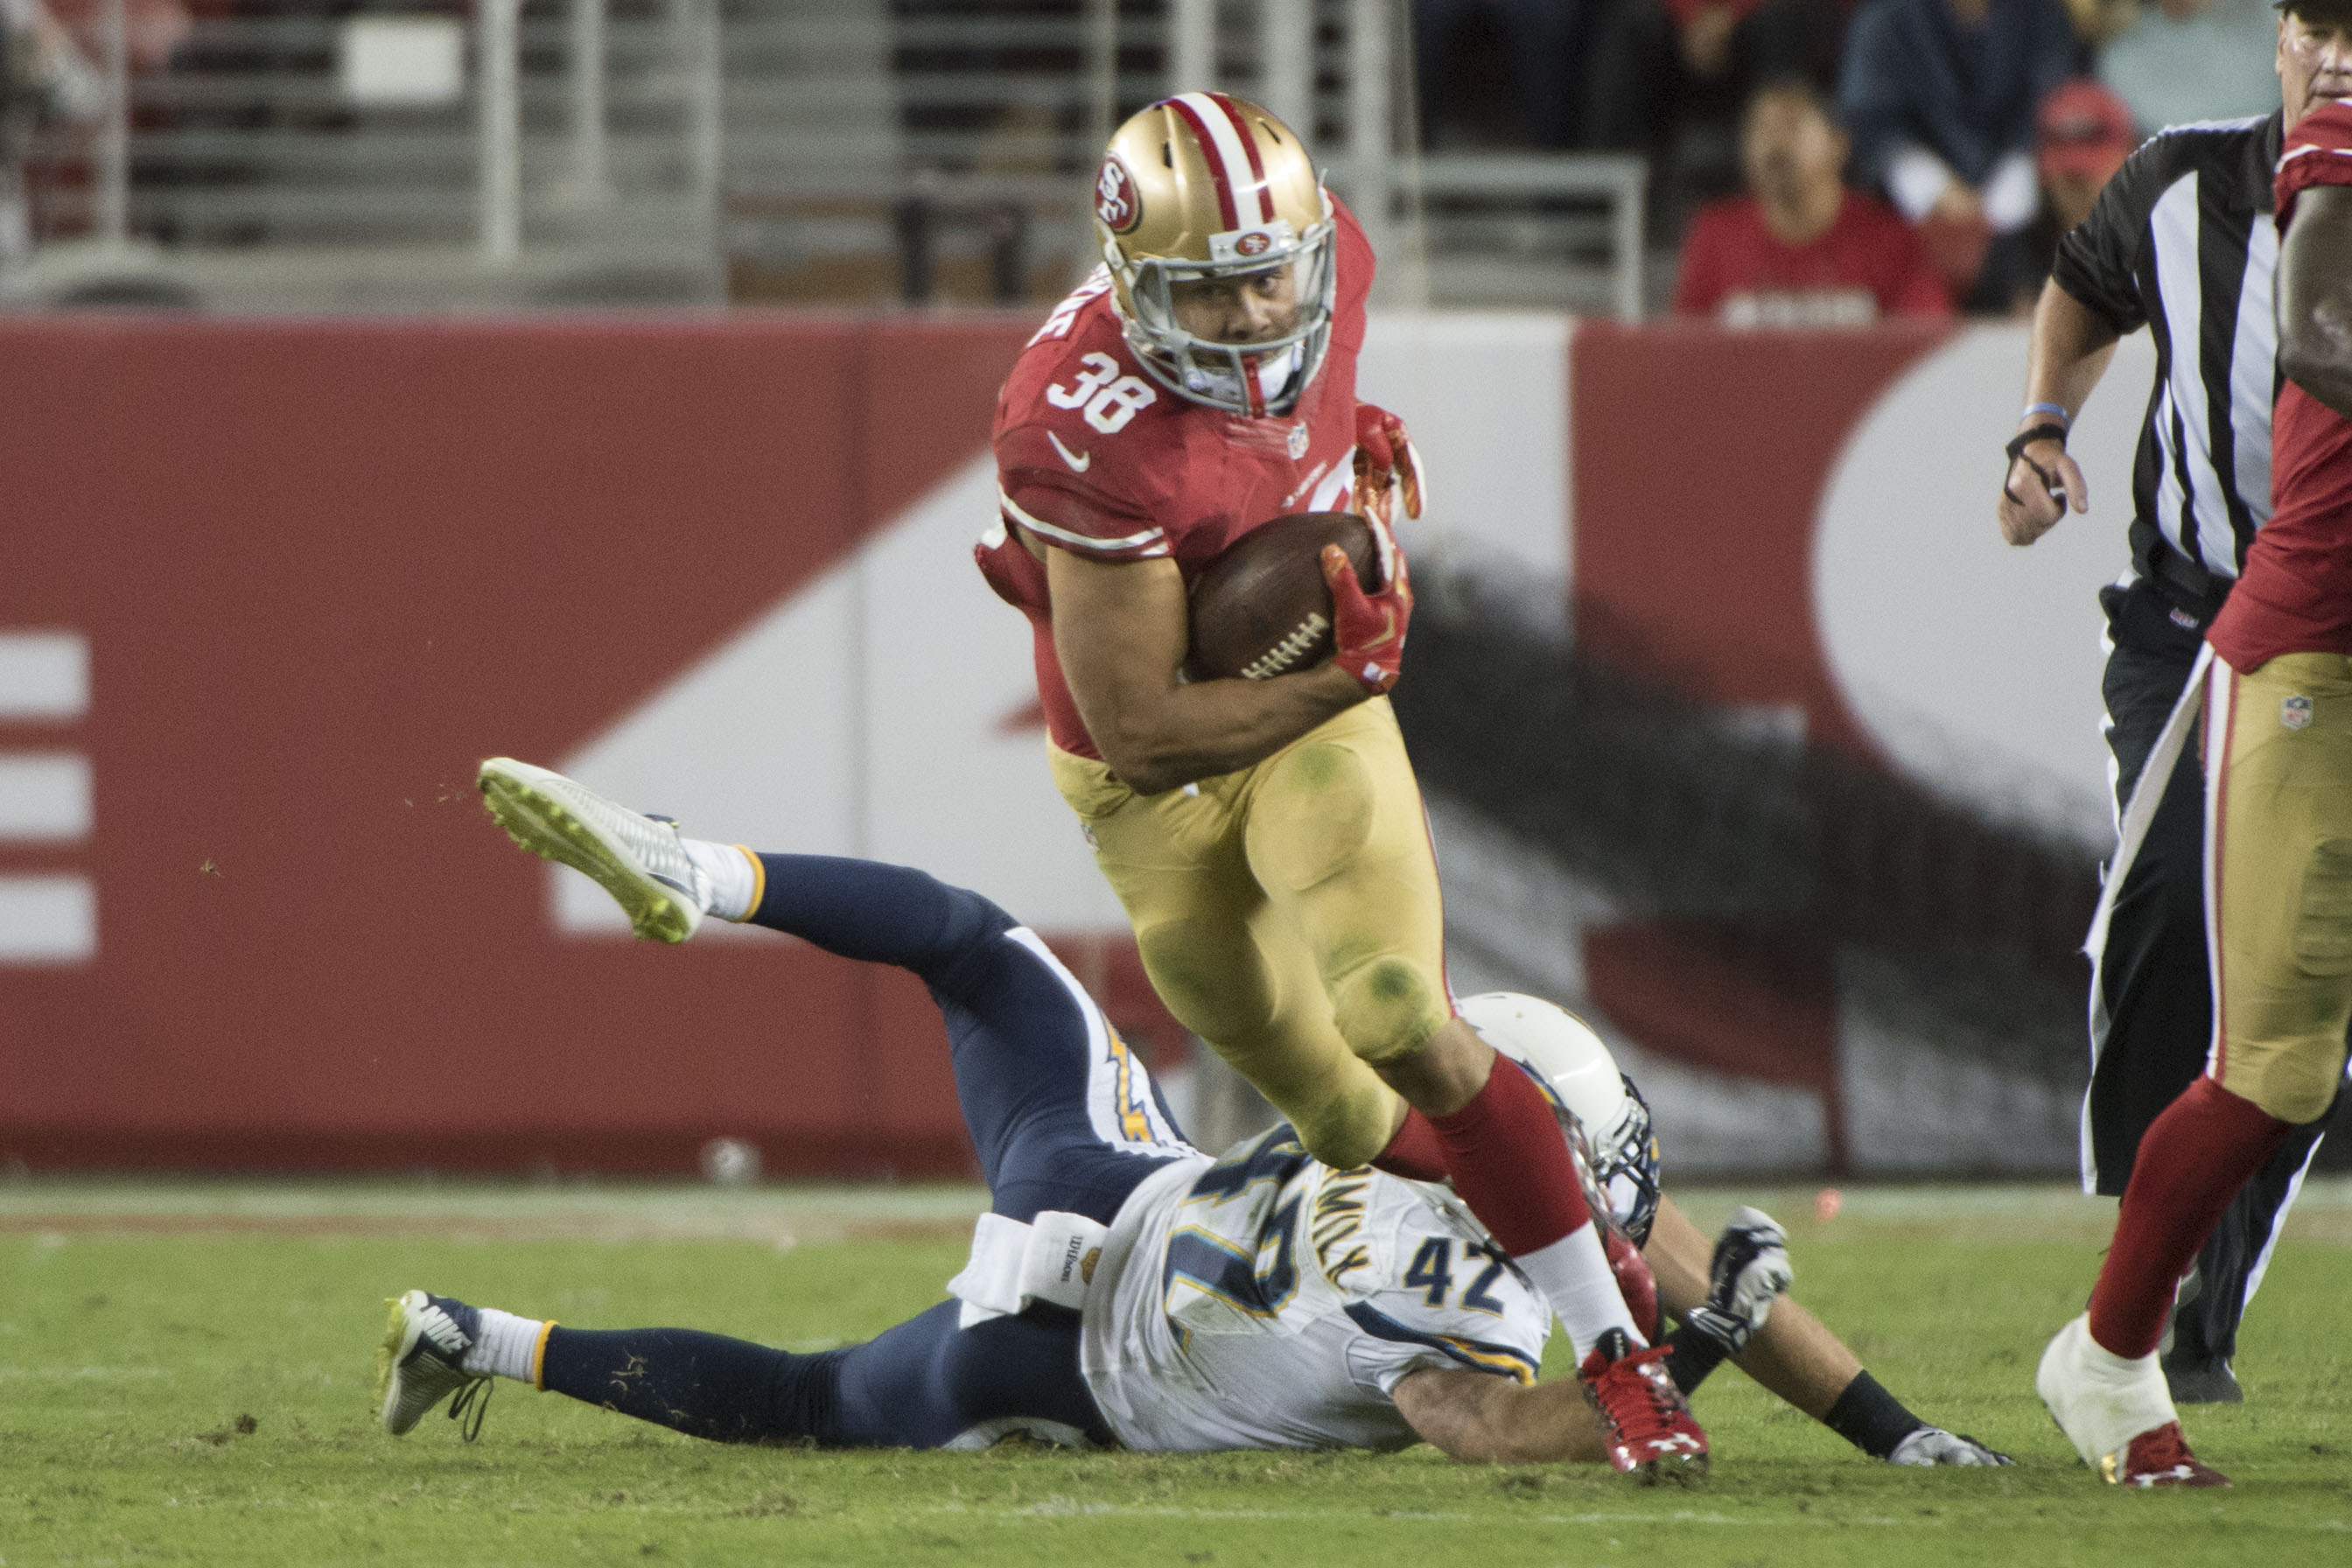 Jarryd Hayne evades a tackle in the 49ers' game against the Chargers. Photo: USA Today